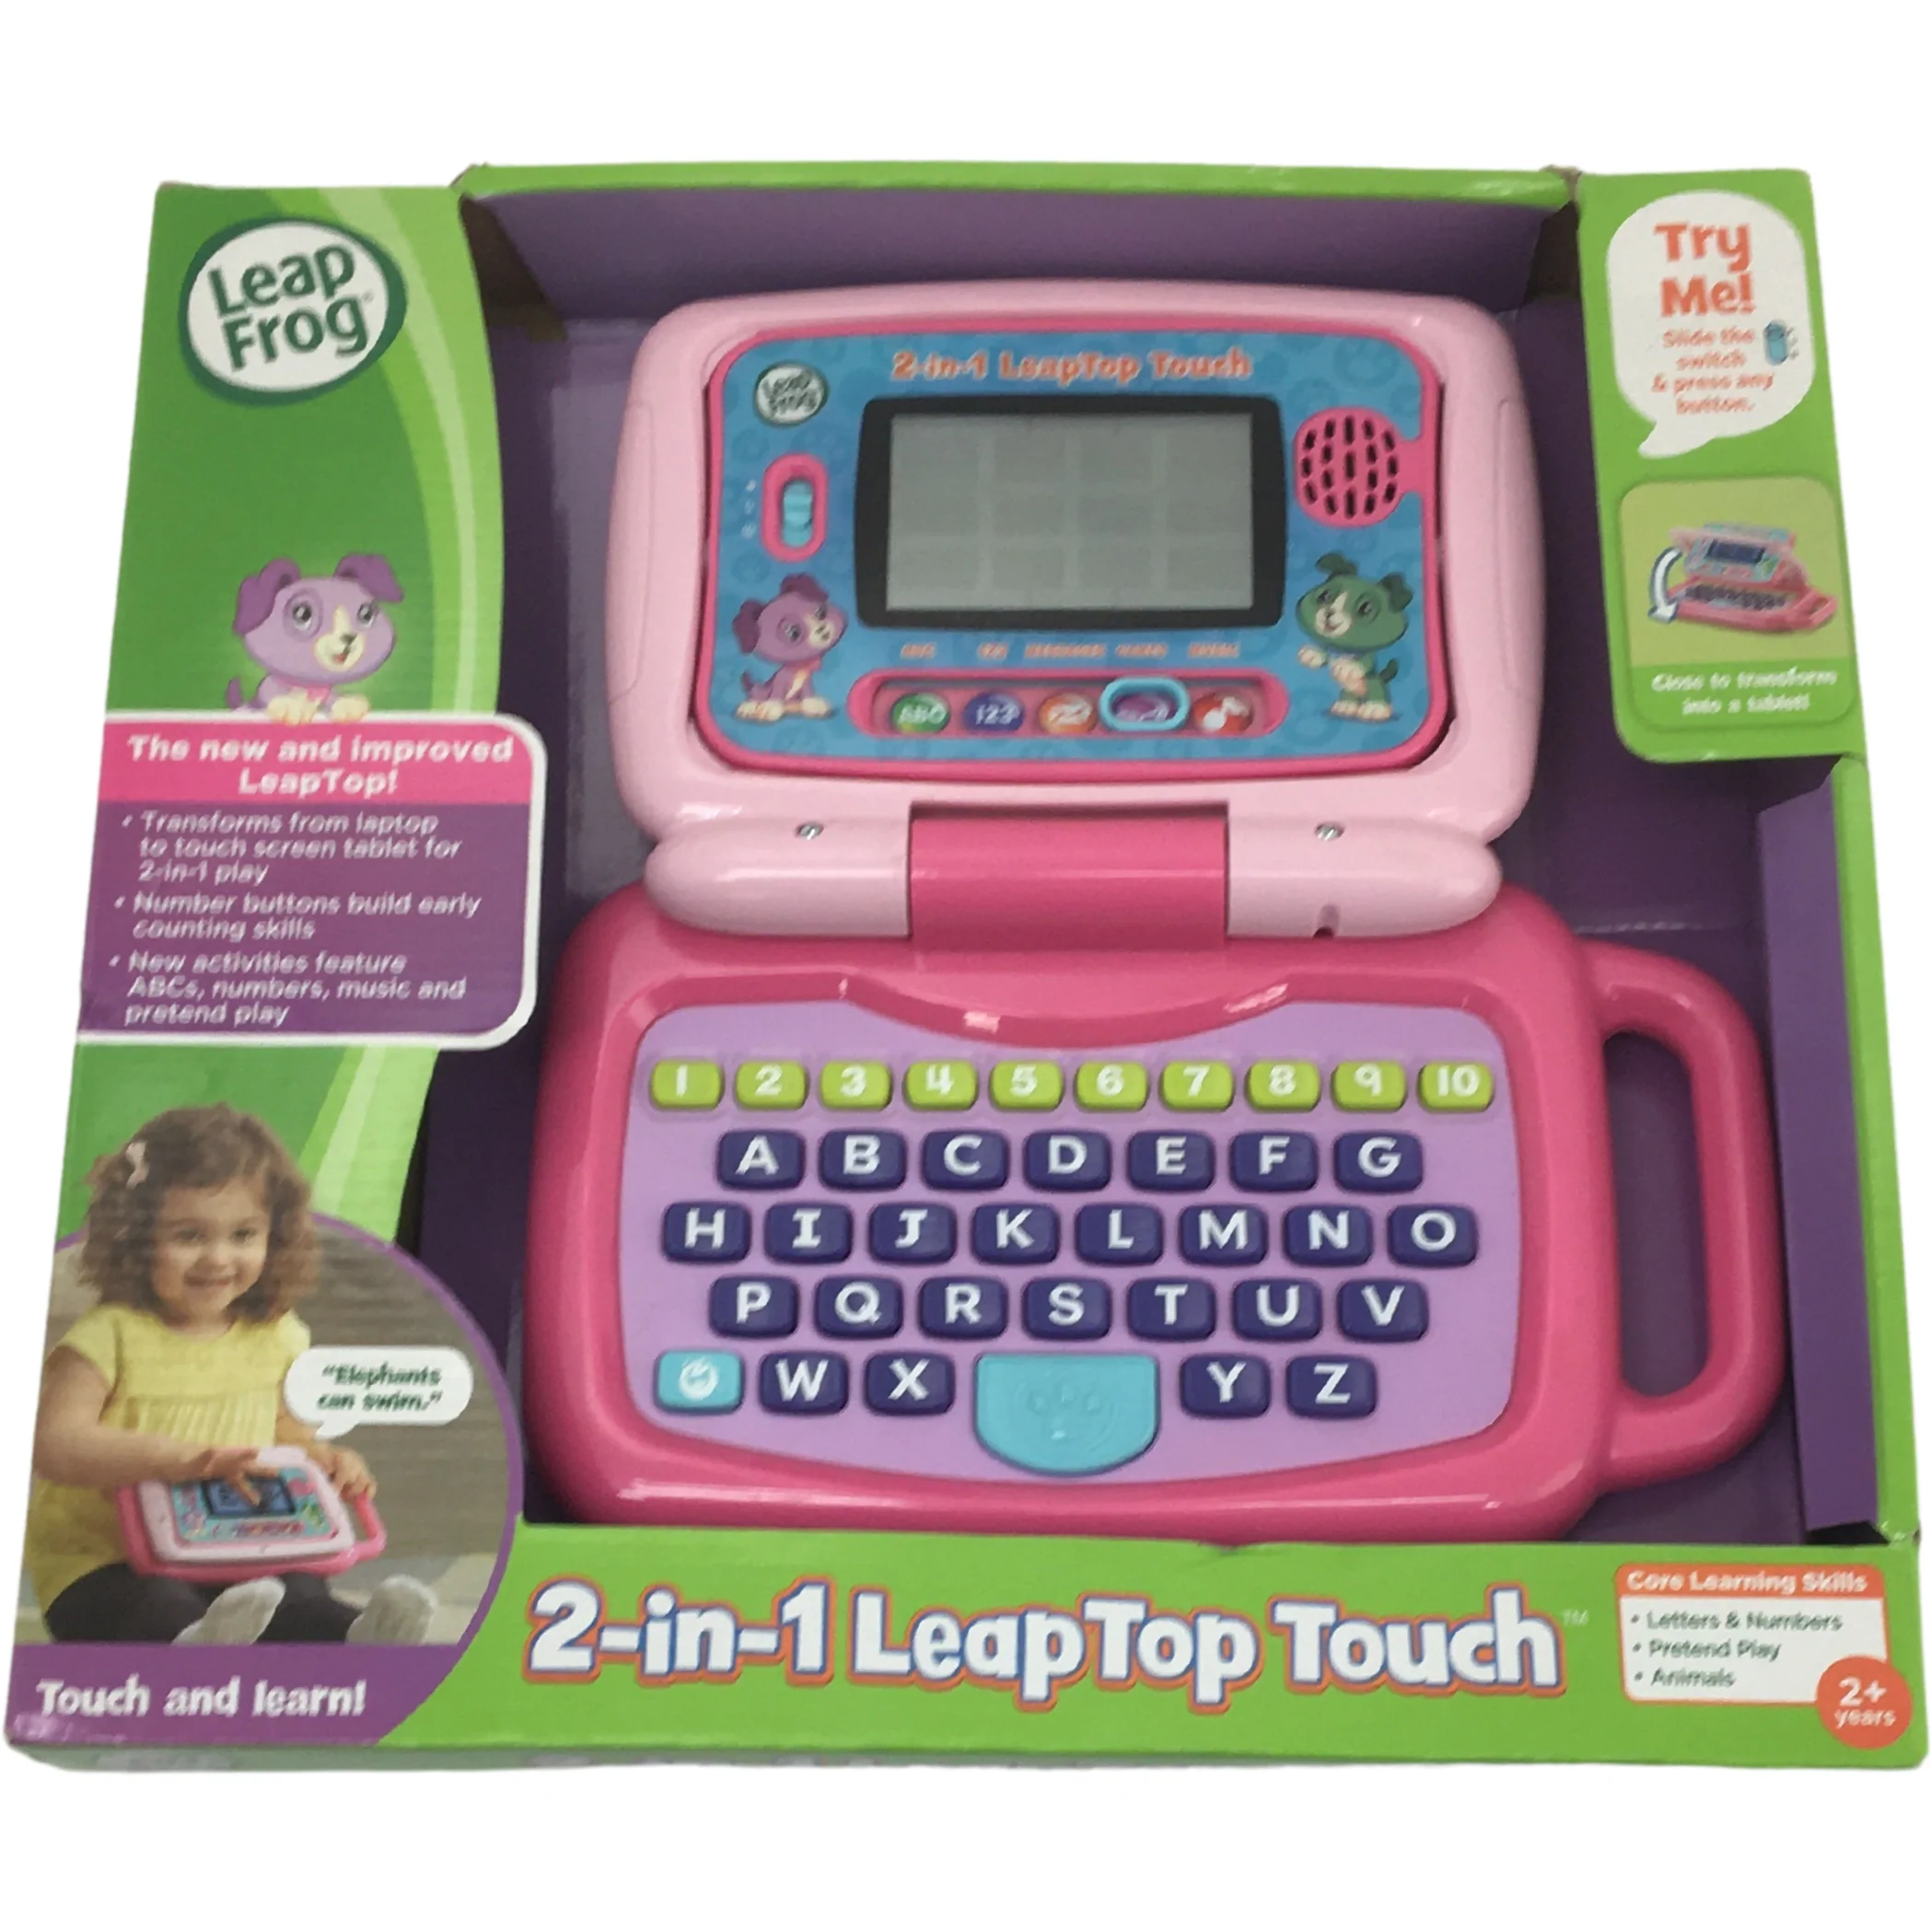 Leap Frog 2 in 1 Leap Top Touch / Early Learning Toy